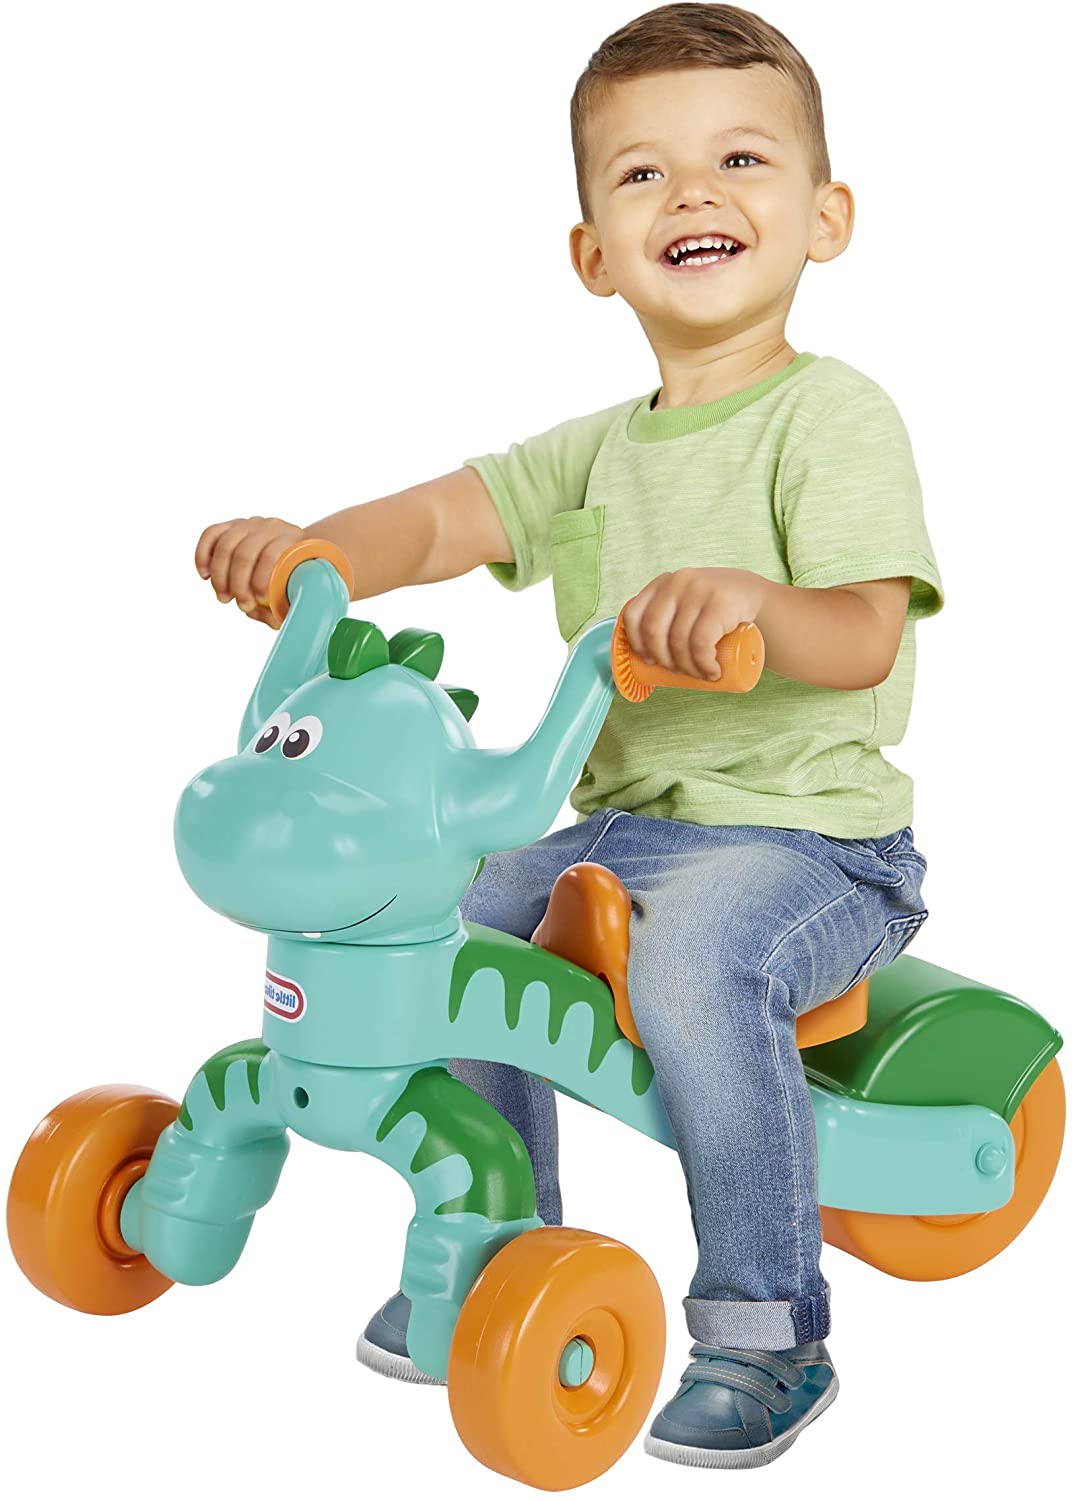 Little Tikes Go & Grow Dino Indoor/Outdoor Ride On Toy Trike $16.85 + FS w/ Amazon Prime or FS on $25+